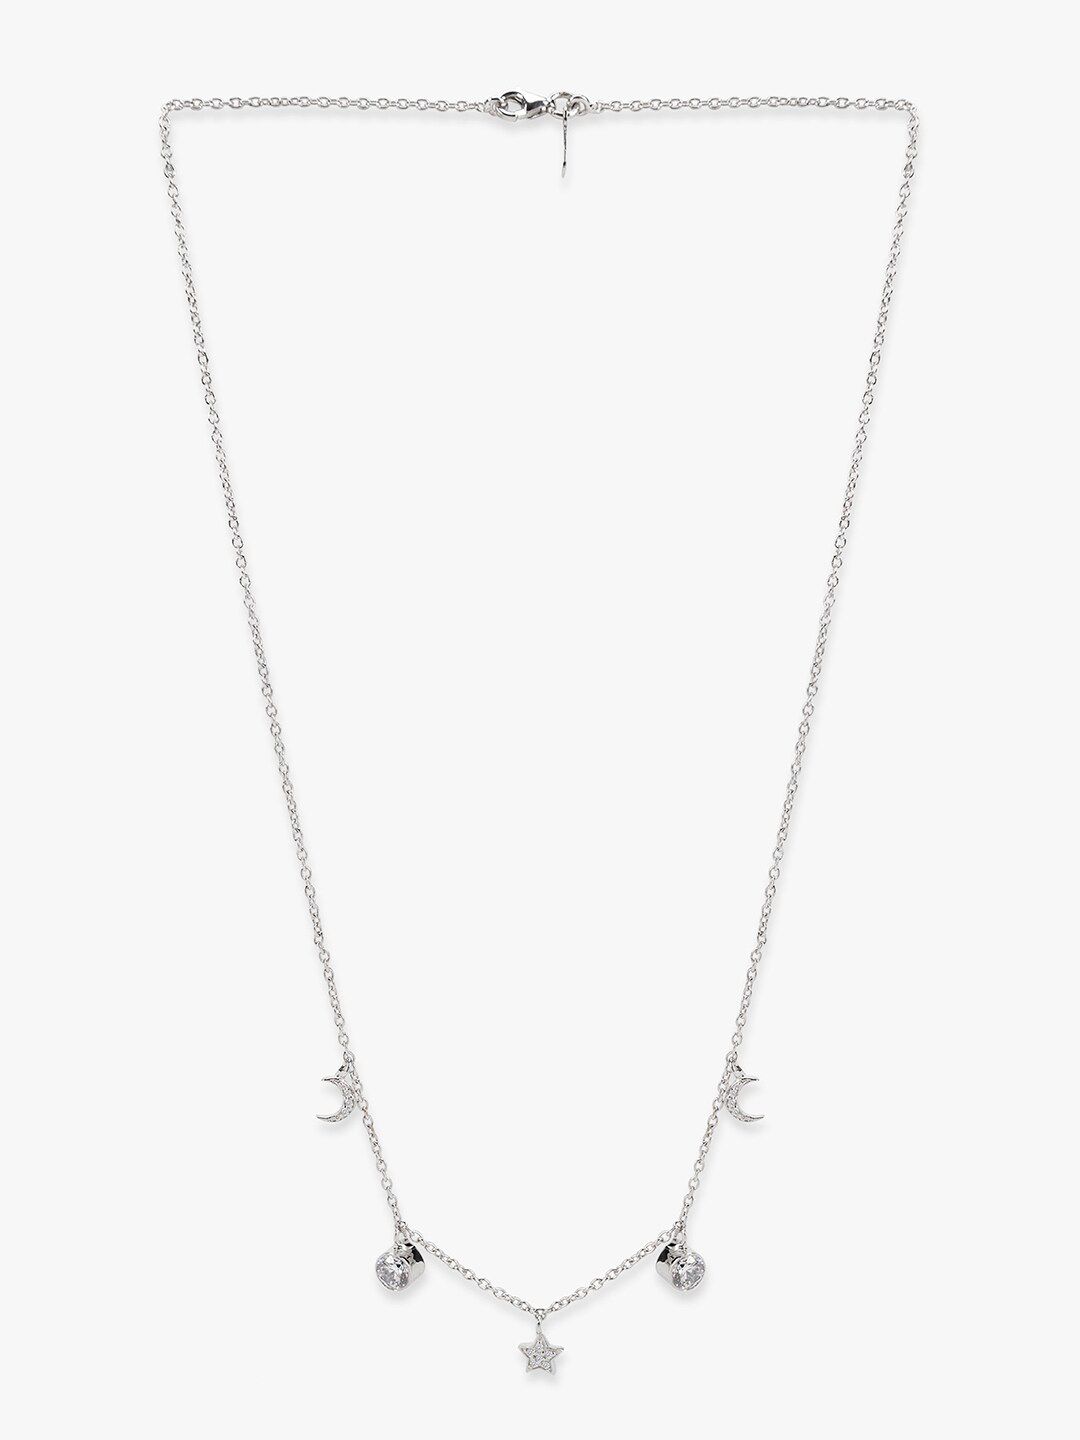 Mikoto by FableStreet Silver-Toned Silver Rhodium-Plated Handcrafted Necklace Price in India